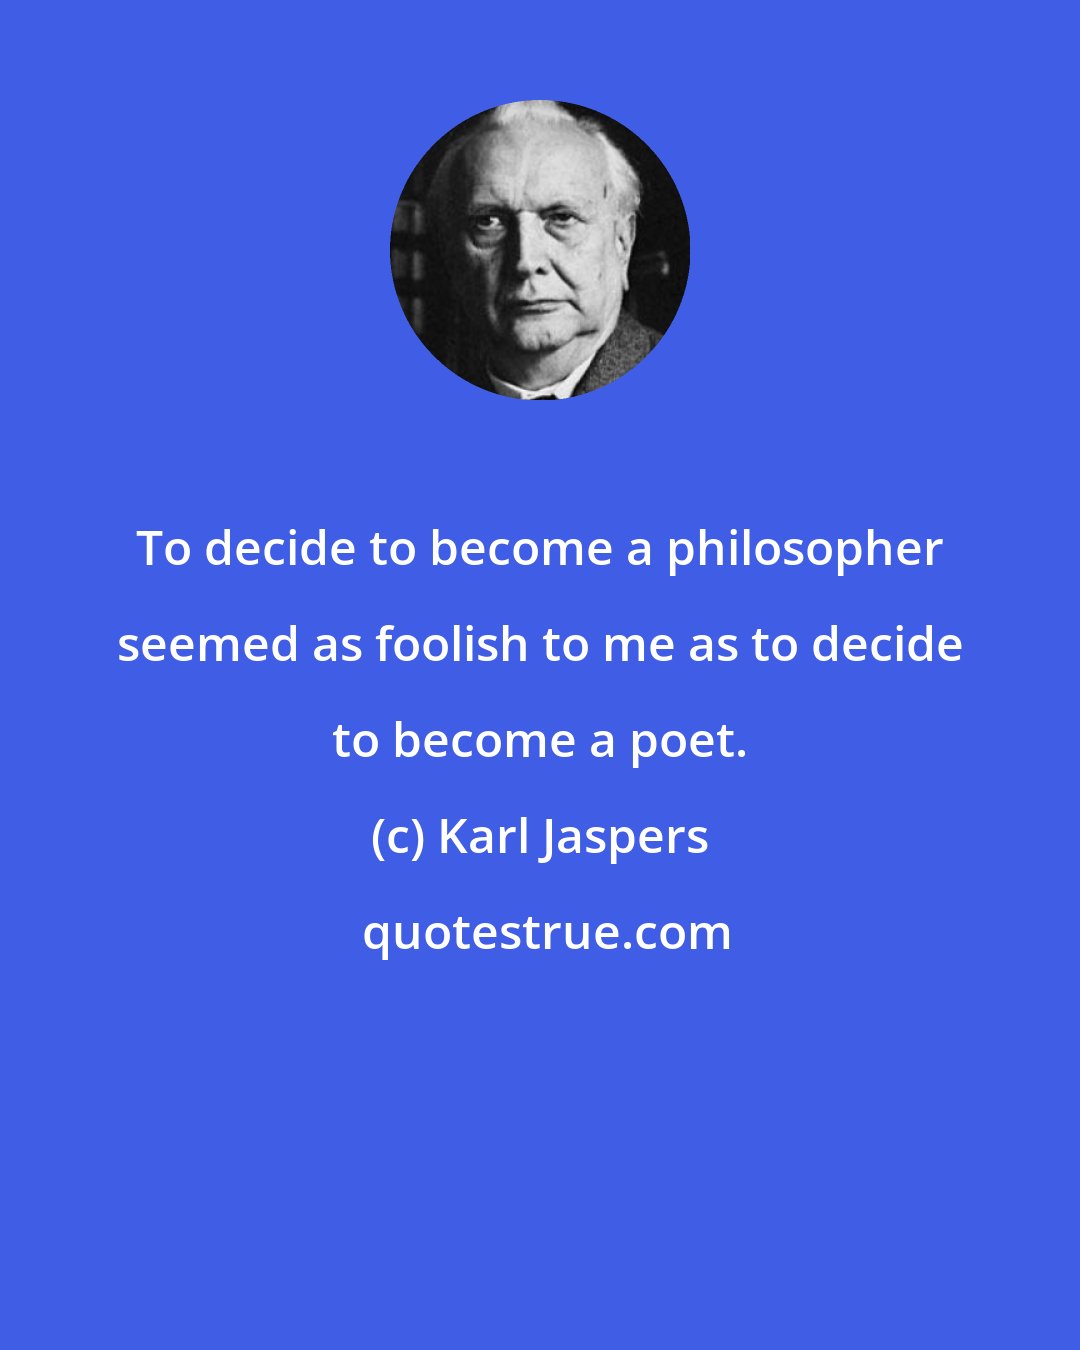 Karl Jaspers: To decide to become a philosopher seemed as foolish to me as to decide to become a poet.